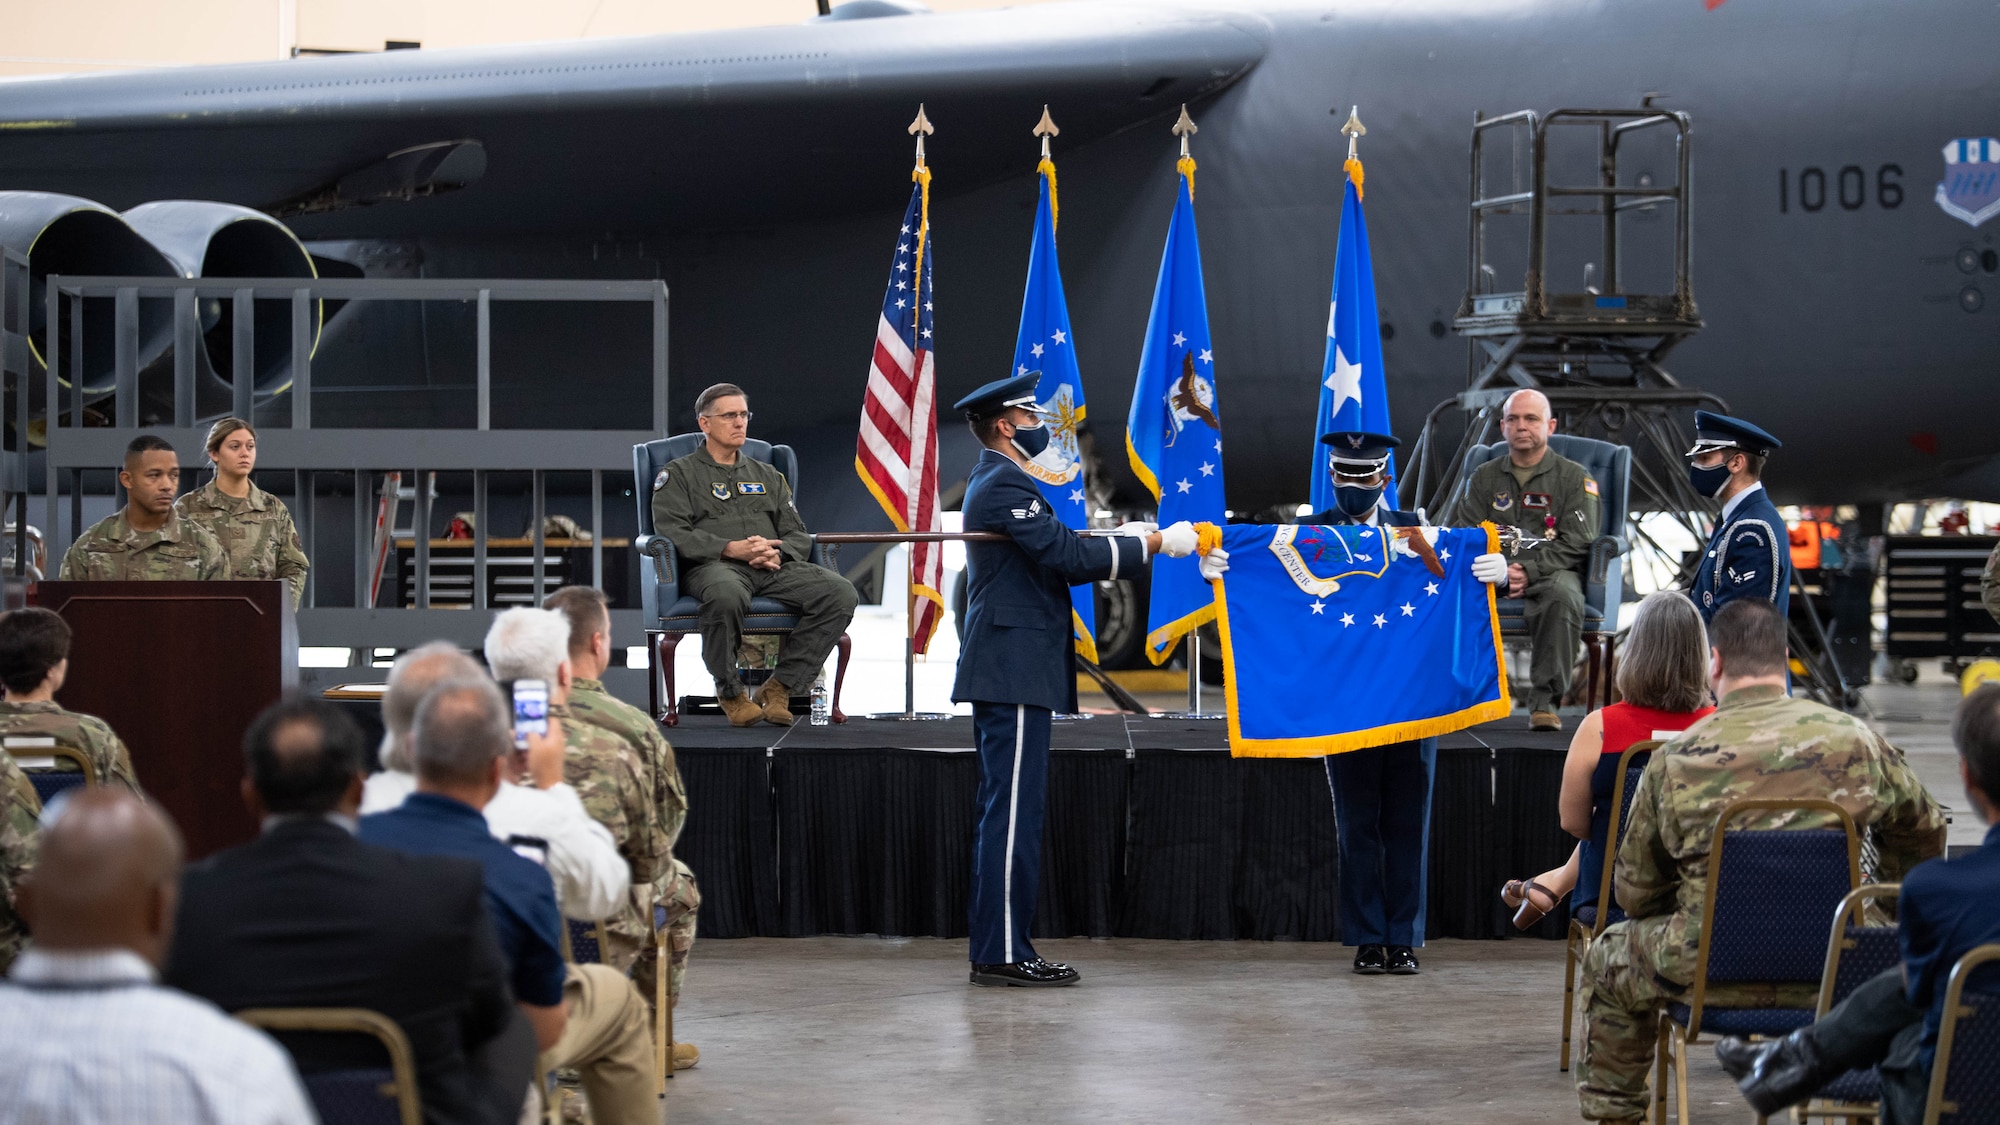 The official flag of the U.S. Air Force's Nuclear Command, Control and Communications Center is ceremoniously folded during the AFNC3 Center's deactivation ceremony at Barksdale Air Force Base, Louisiana, June 4, 2021. After making significant strides to normalize the way in which the Air Force handles nuclear command, control and communications systems, the AFNC3 Center was formally deactivated June 4. (U.S. Air Force photo by Senior Airman Jacob B. Wrightsman)